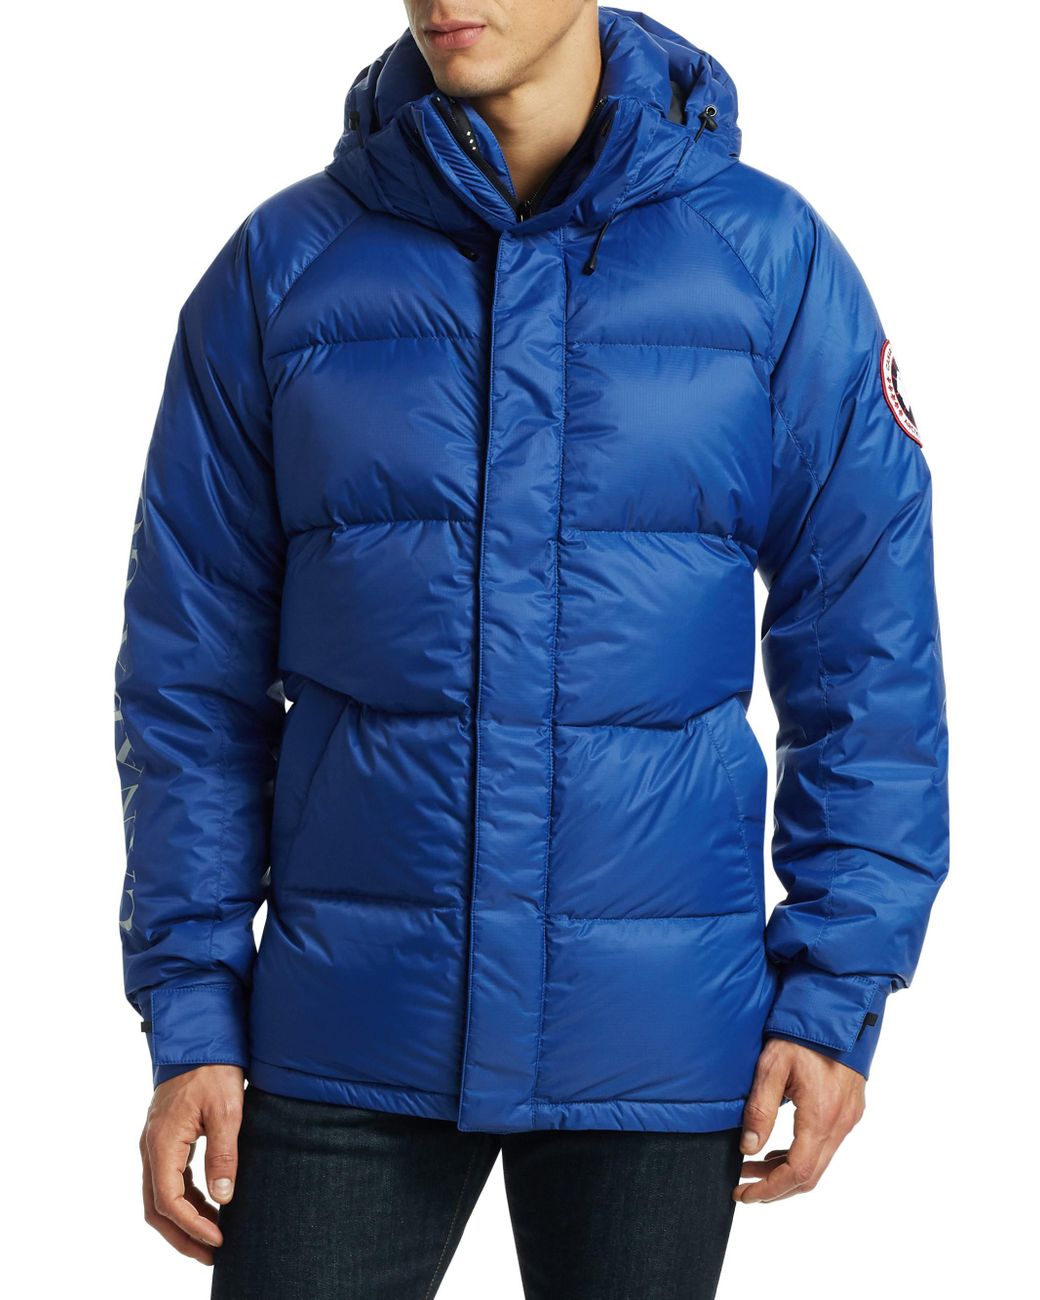 Lyst - Canada Goose Approach Puffer Jacket in Blue for Men